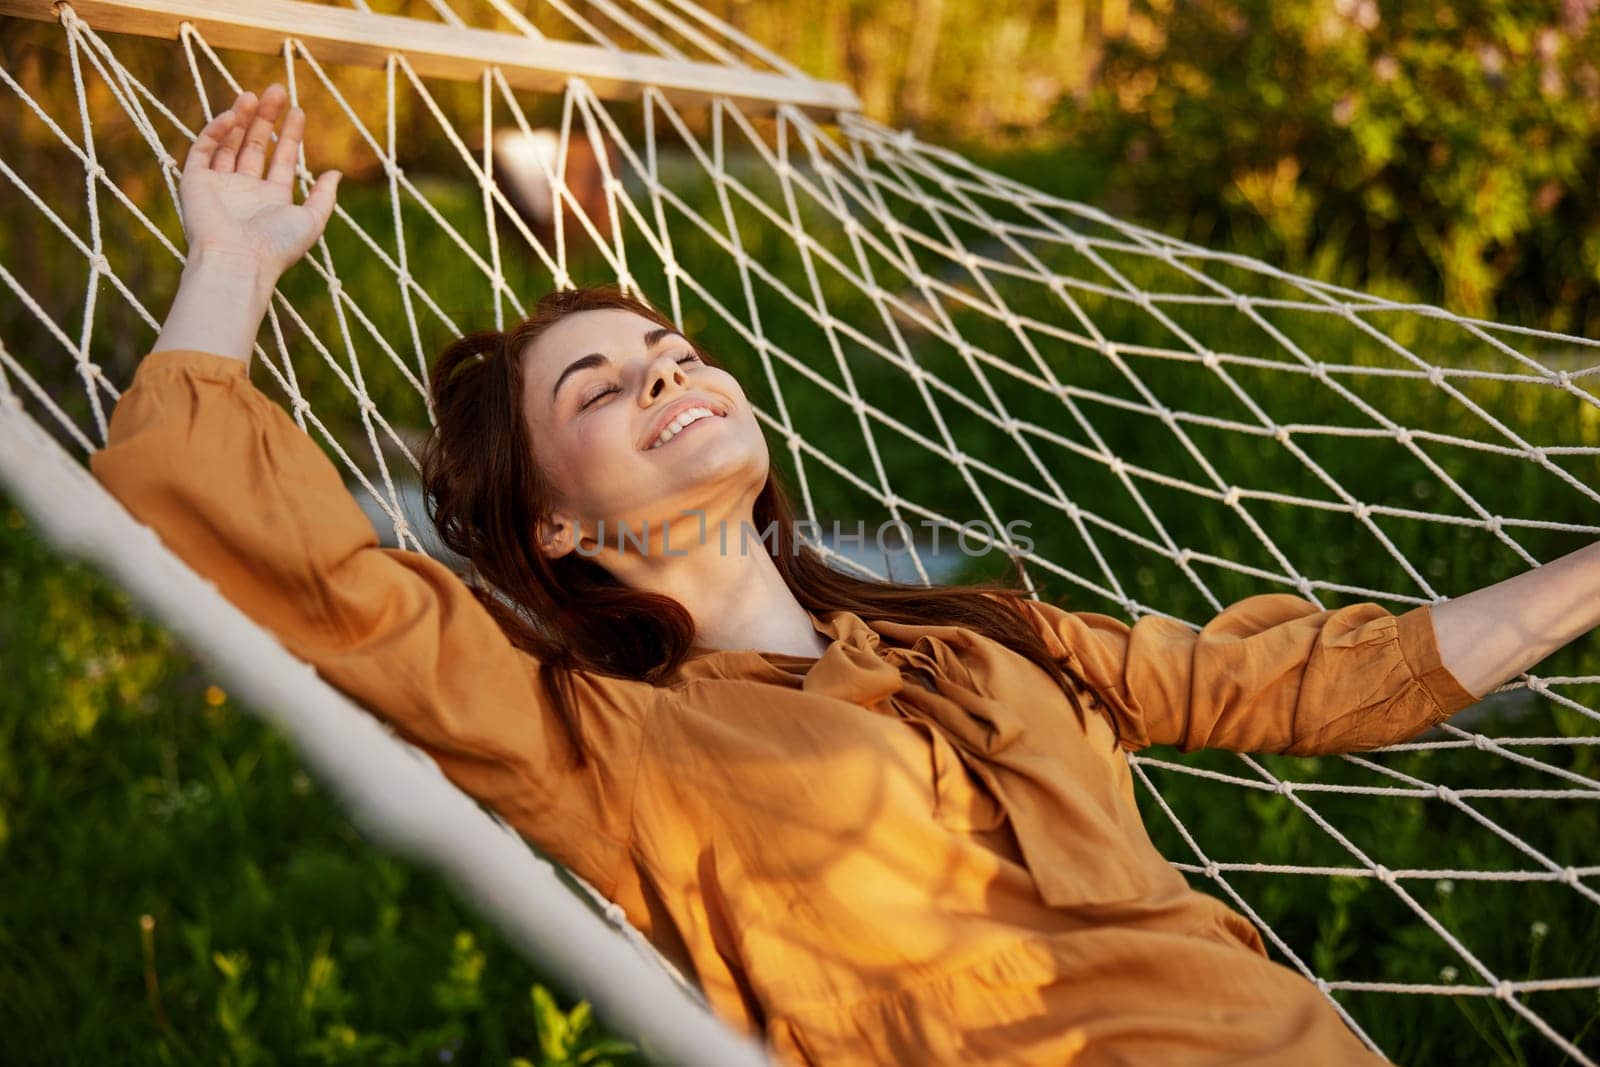 a happy woman is resting in a hammock with her eyes closed and her hands behind her head smiling happily enjoying the day by Vichizh